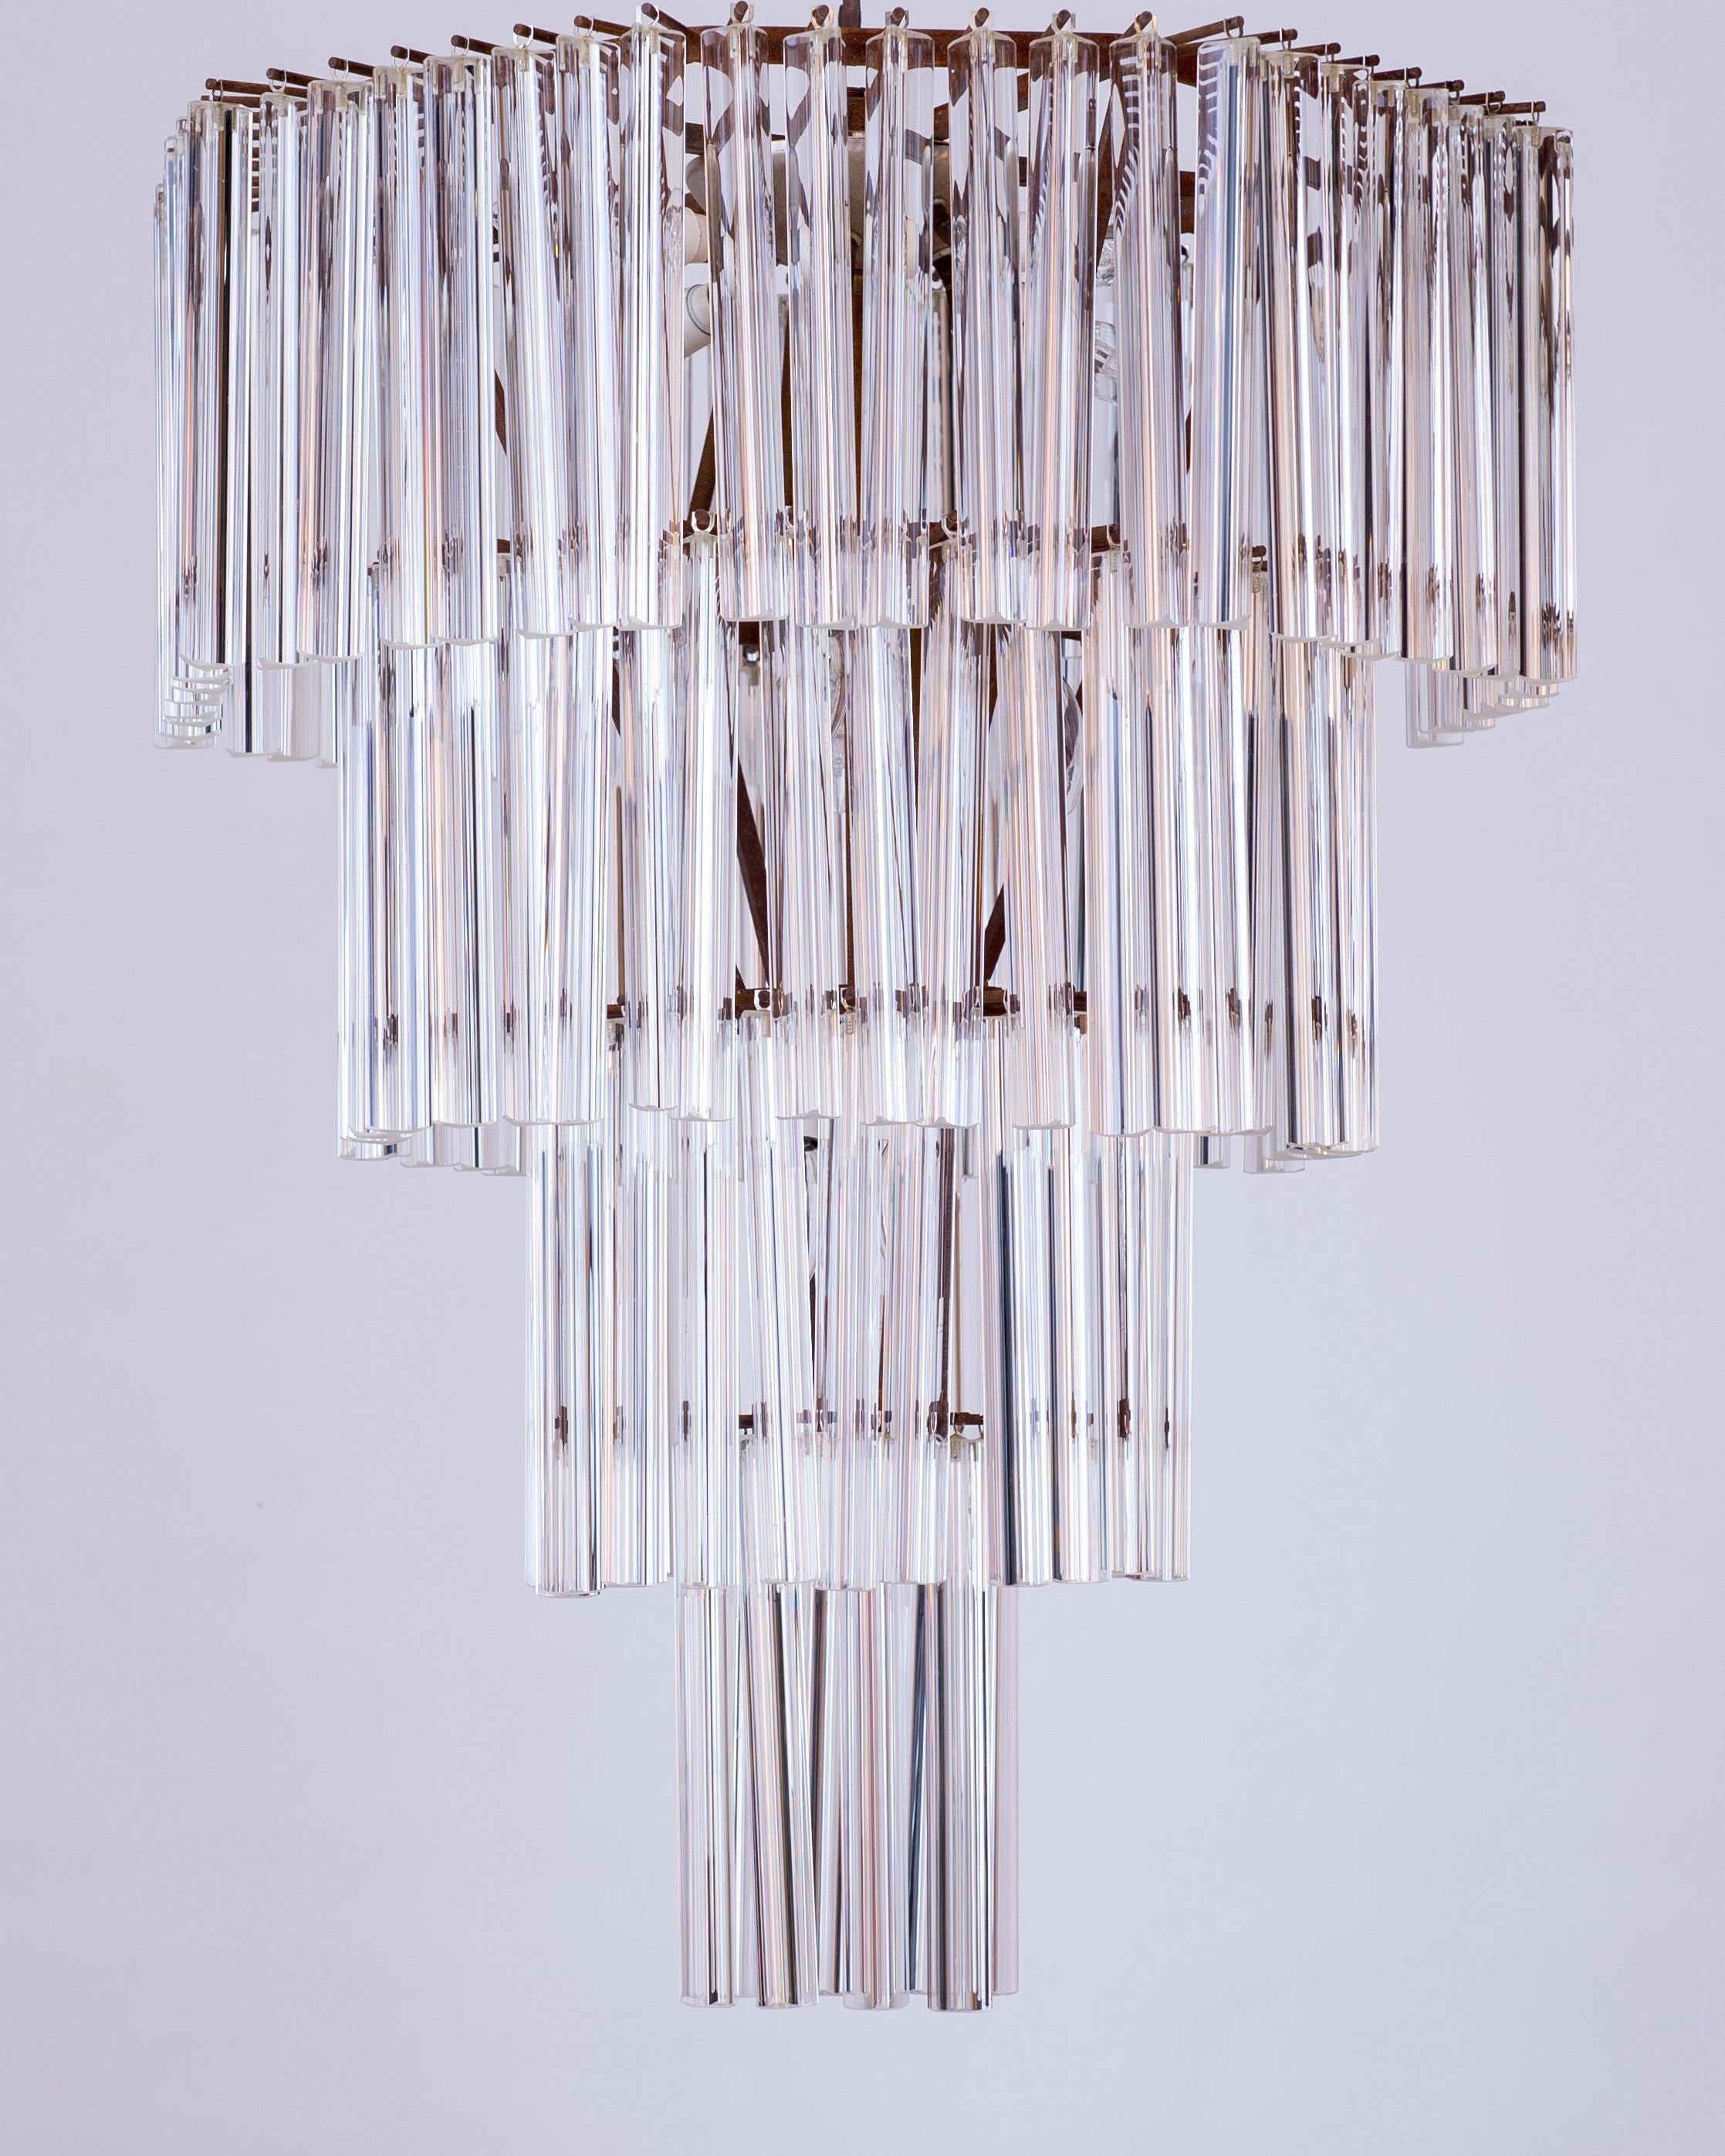 Vintage trihedron chandelier in Murano glass, attributed to Venini, 1970s.
The octagonal framework supports four rows of transparent Murano glass trihedrons that filter and reflect the light coming from 11 light bulbs. Each trihedron is hanging